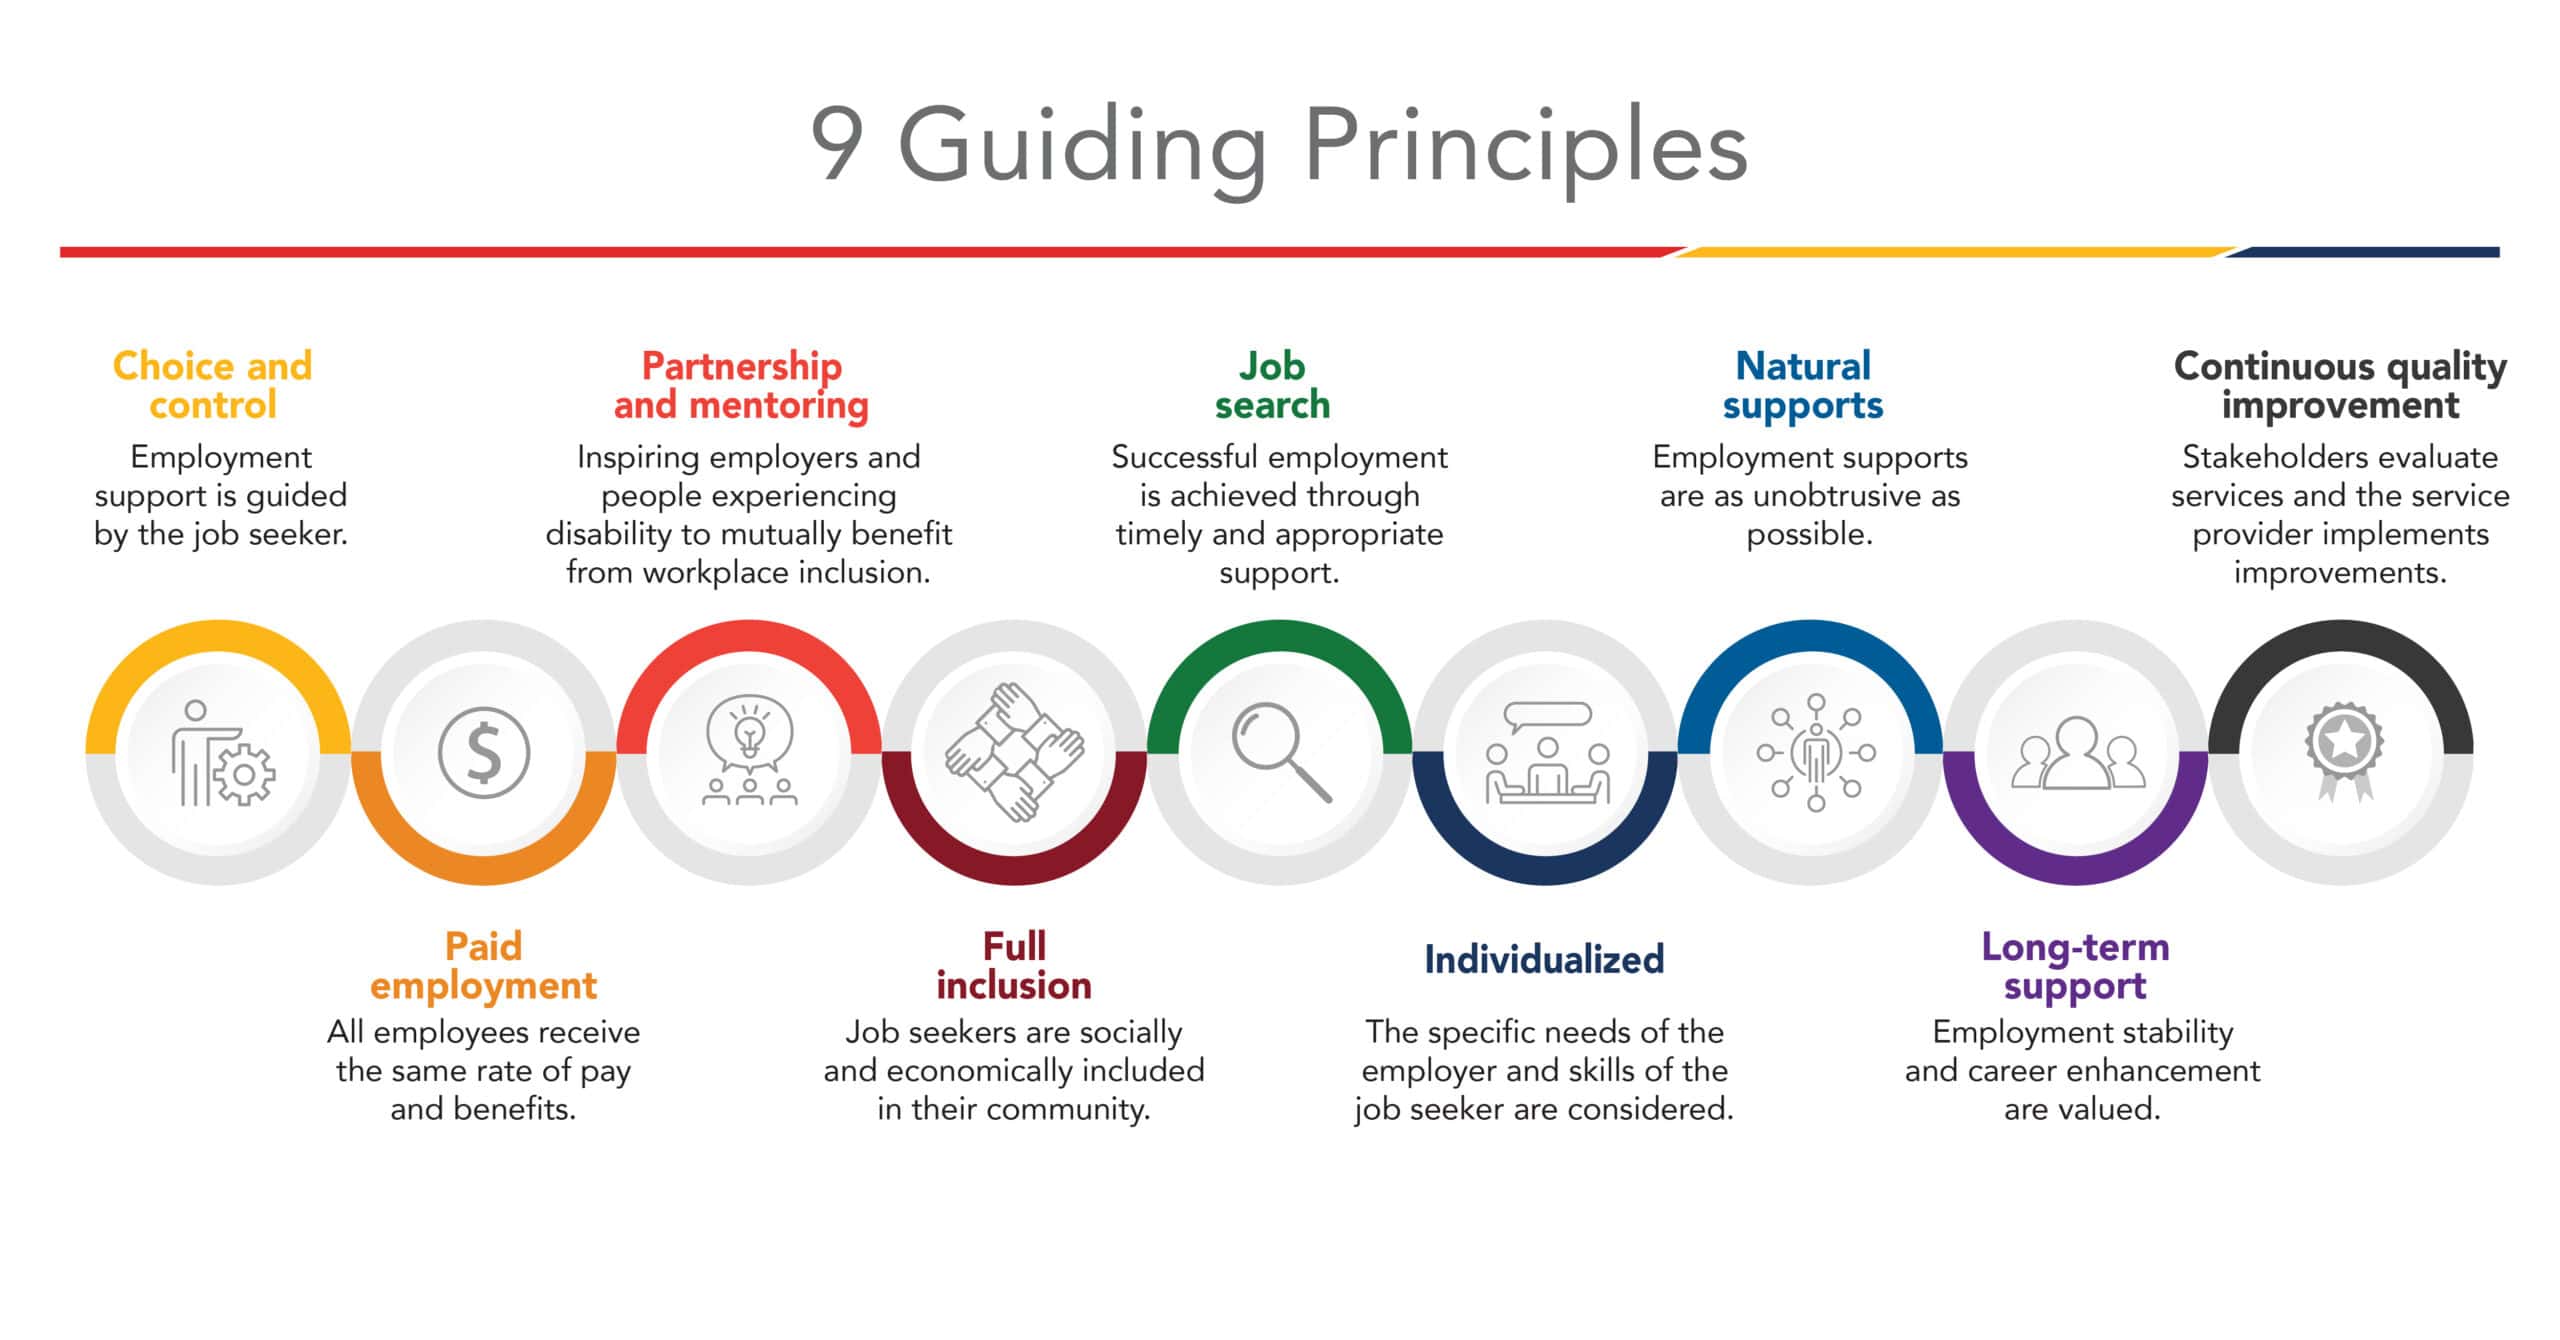 Image of CASE's 9 Guiding Princples: Choice and control - Employment support is guided by the job seeker. Partnership & mentoring - Inspiring employers and persons experiencing disability to mutually benefit from workplace inclusion. Job search - Successful employment is achieved through timely and appropriate support. Natural supports - Employment supports are as unobtrusive as possible. Continuous quality improvement - Stakeholders evaluate services and the service provider implements improvements. Paid employment - All employees receive the same rate of pay and benefits. Full inclusion: Job seekers are socially and economically included in their community. Individualized - The specific needs of the employer & skills of the job seeker are considered. Long-term support - Employment stability and career enhancement are valued.